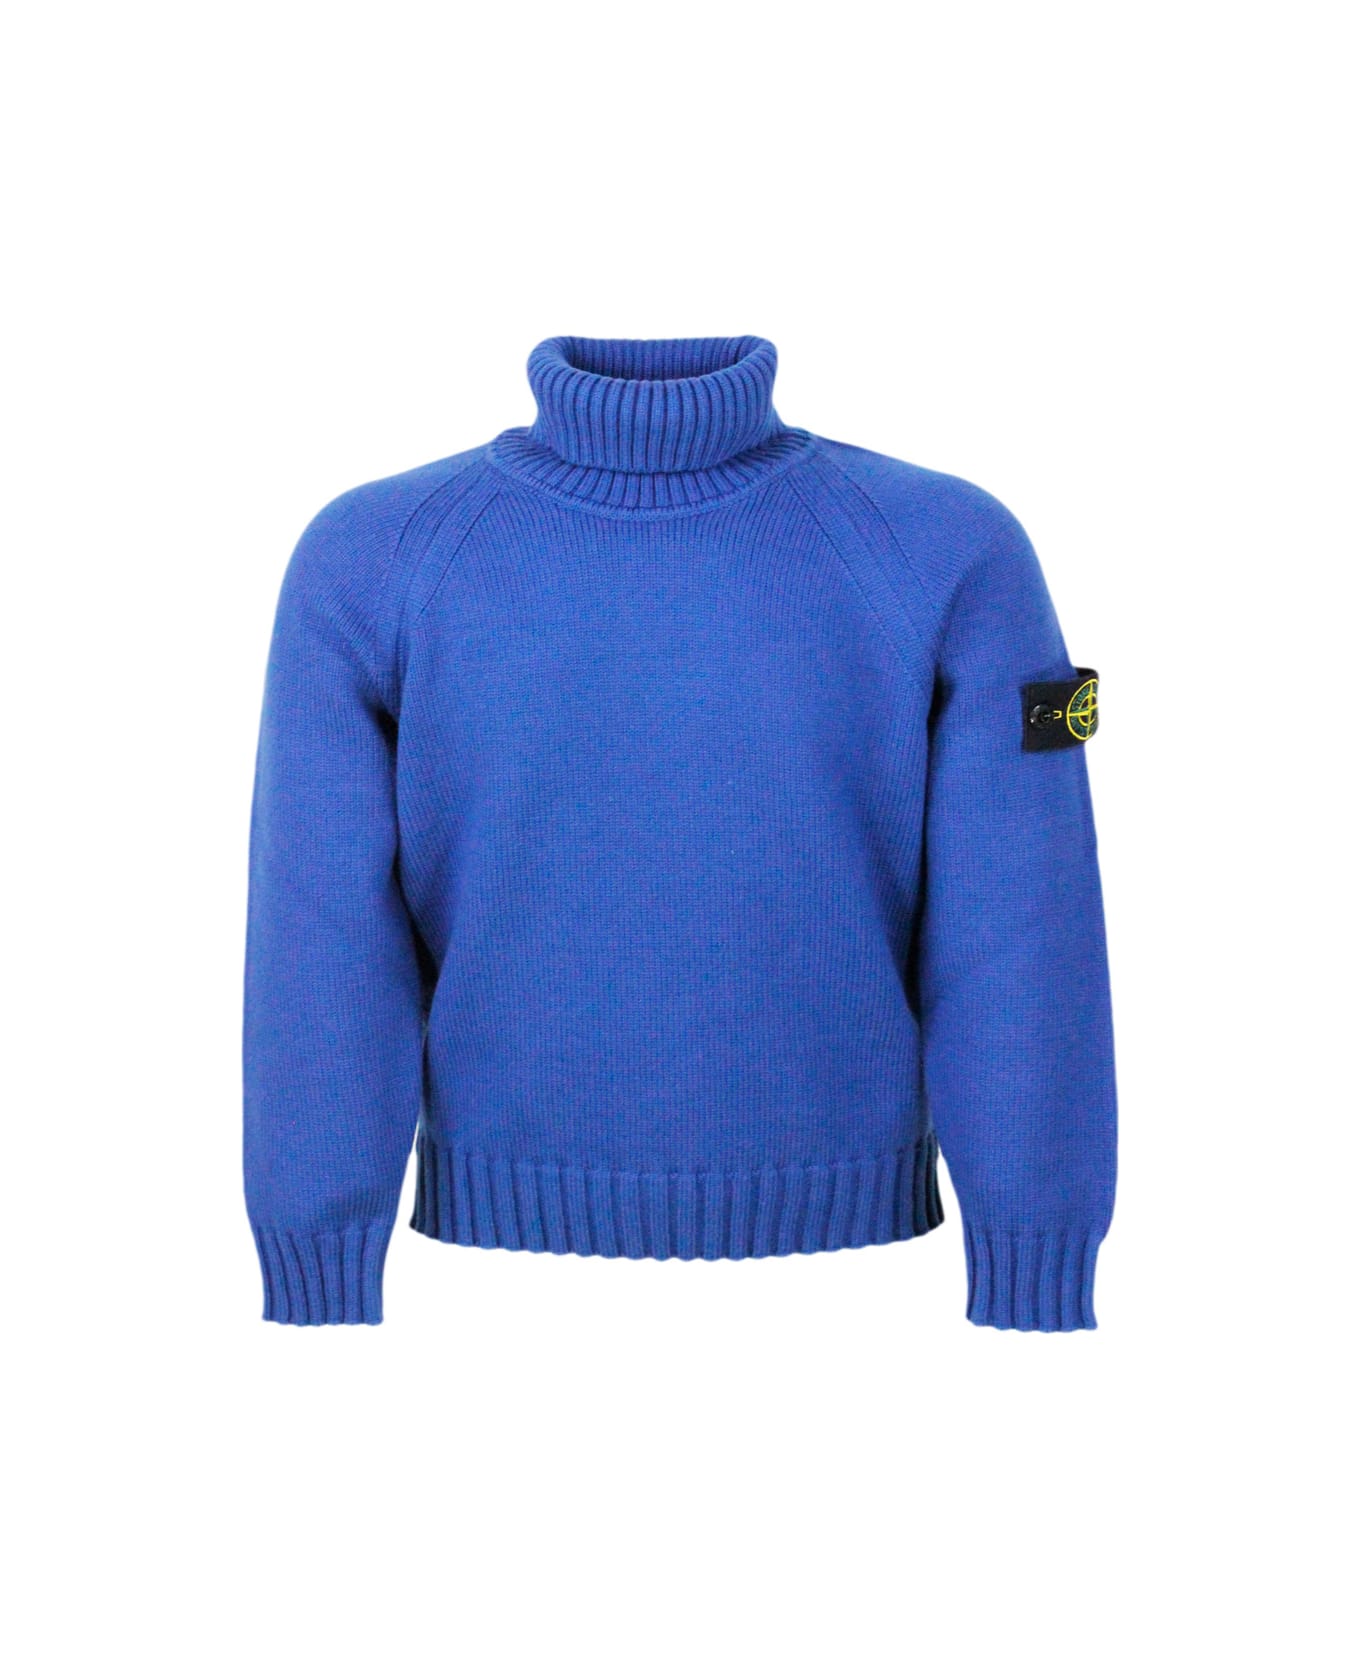 Stone Island Junior Long-sleeved Turtleneck Sweater In Warm Stretch Cotton With Badge On The Left Sleeve - Blu royal ニットウェア＆スウェットシャツ